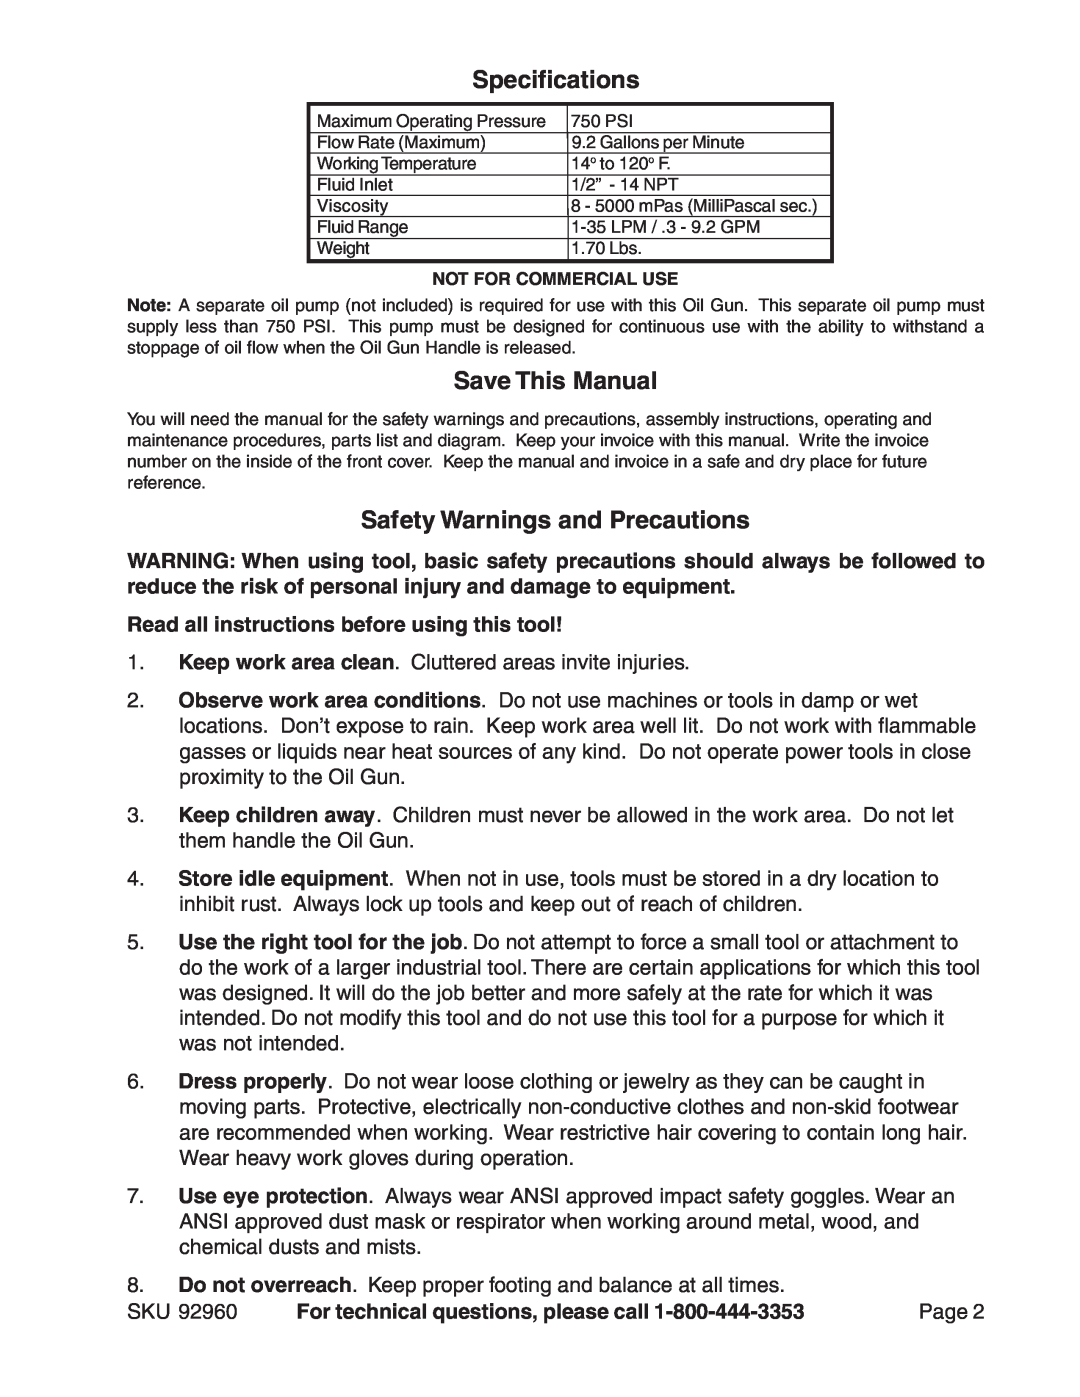 Harbor Freight Tools 92960 manual Specifications, Save This Manual, Safety Warnings and Precautions 